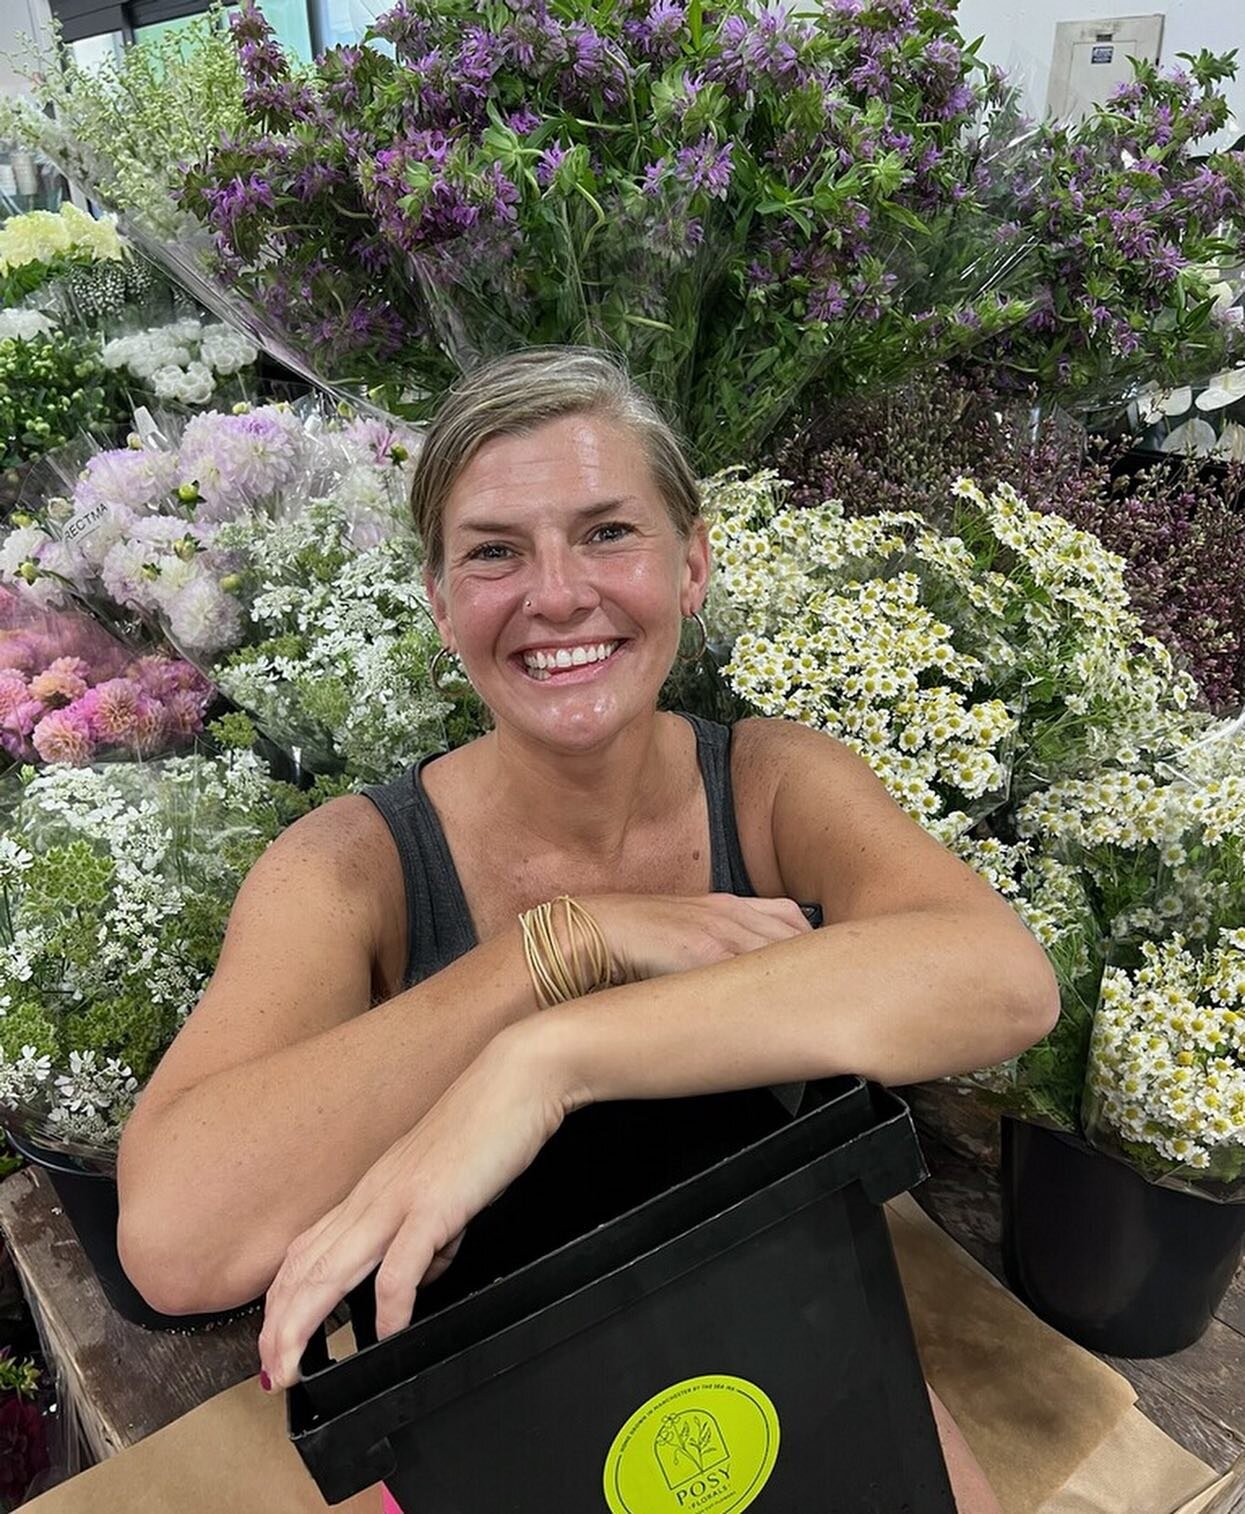 Today is a big day for POSY! We are selling our first bunches of local blooms at the big Boston wholesale flower market, exclusively through Paula  @directflowers2florist! 

Bunches of local Monarda (Bergamot Bee Balm), Feverfew Magic Single and Orla